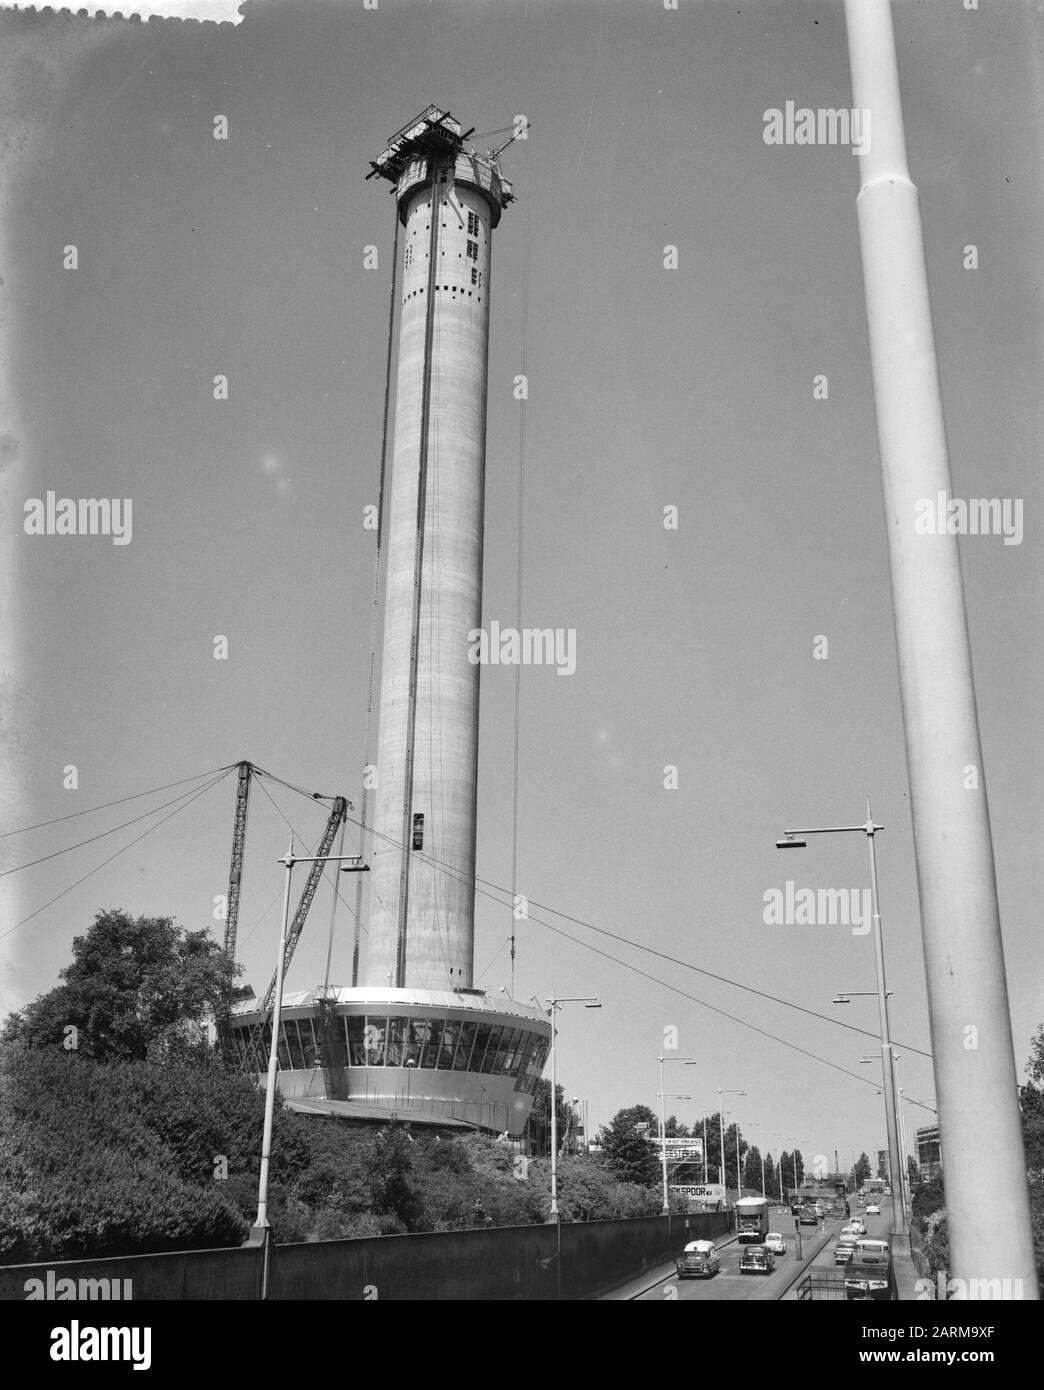 The Euromast  Euromast, restaurant is hoisted to top Annotation: The Euromast (1958-1960) was designed by architect H.A. Maaskant on the occasion of the Floriade in Rotterdam in 1960. designated as National Monument Date: 6 July 1959 Location: Rotterdam, Zuid-Holland Keywords: construction Stock Photo